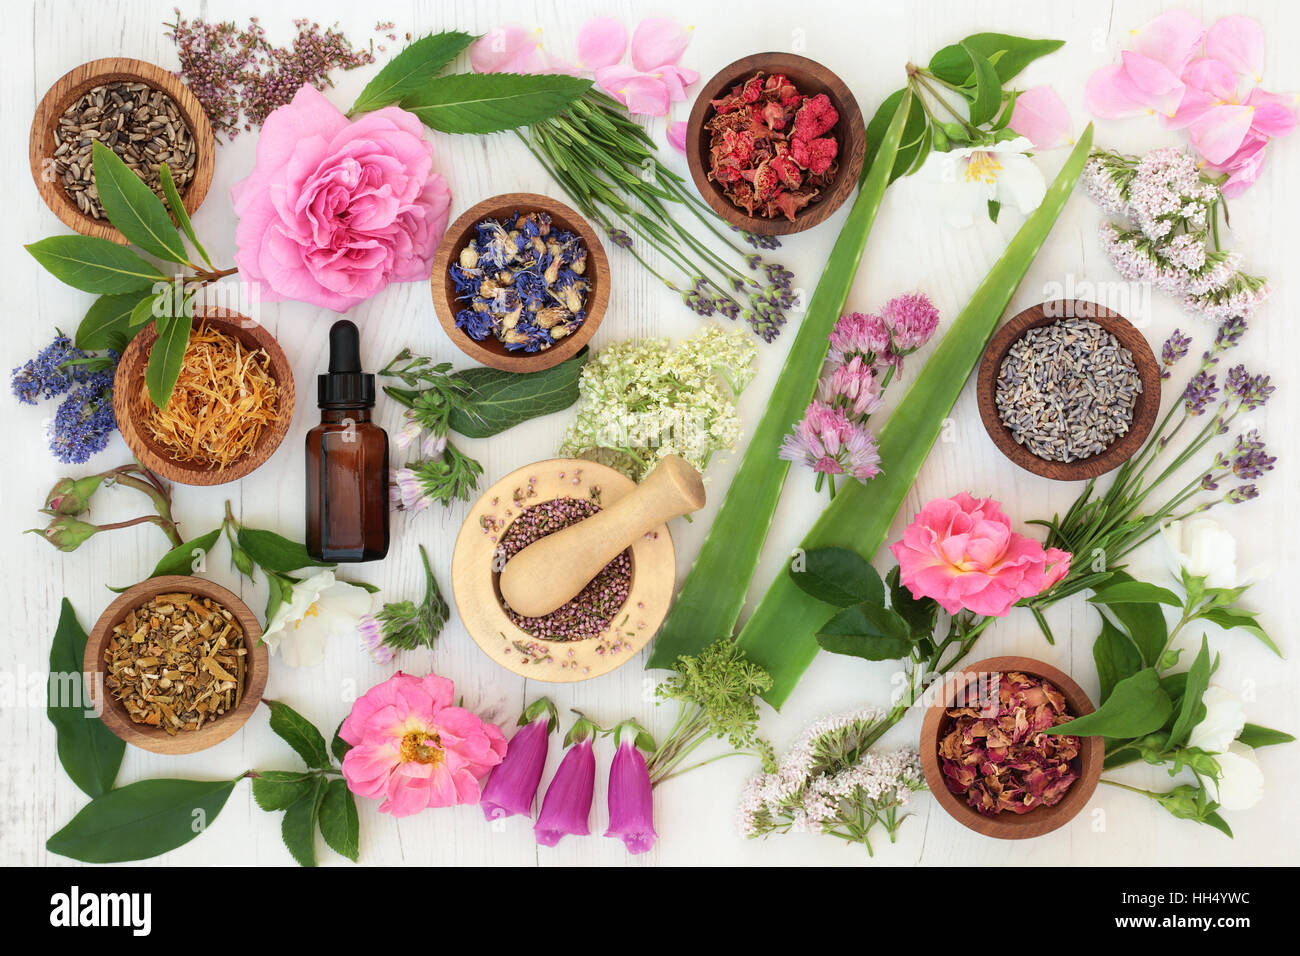 Healing flower and herb selection used in natural alternative medicine on distressed white wood background. Stock Photo